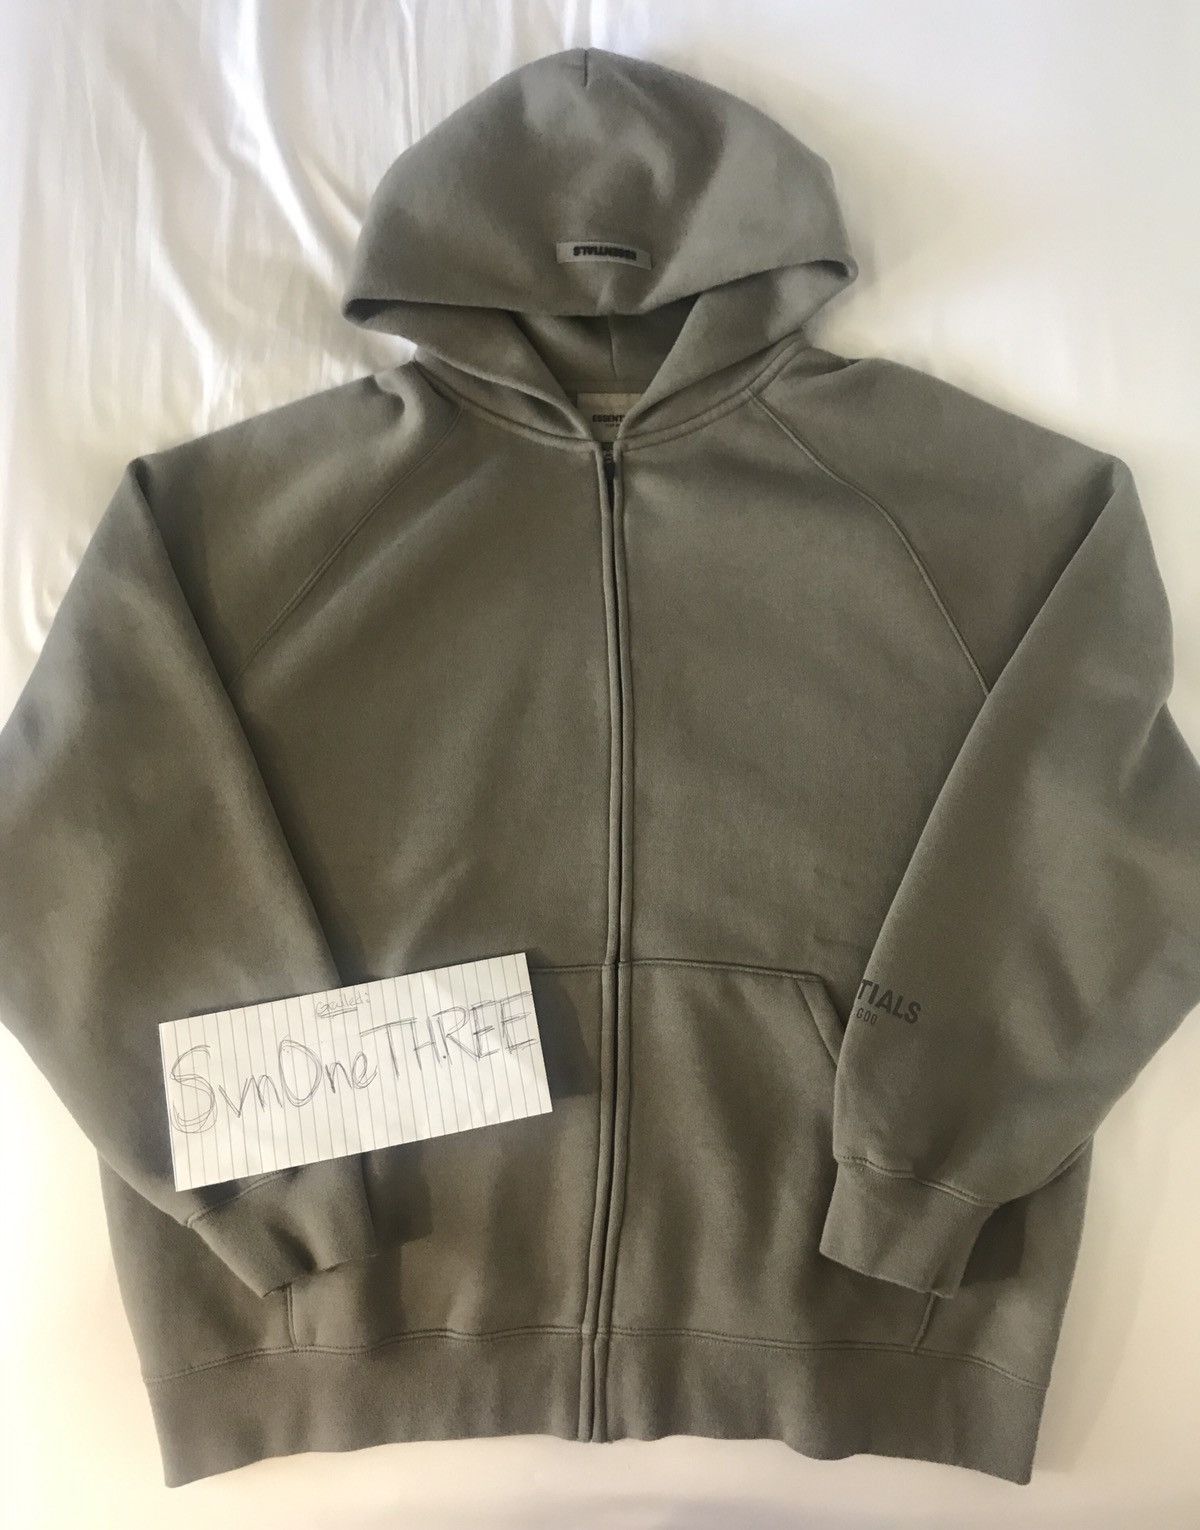 Fear of God Essentials 3D Silicon Applique Full Zip Up Hoodie Gray